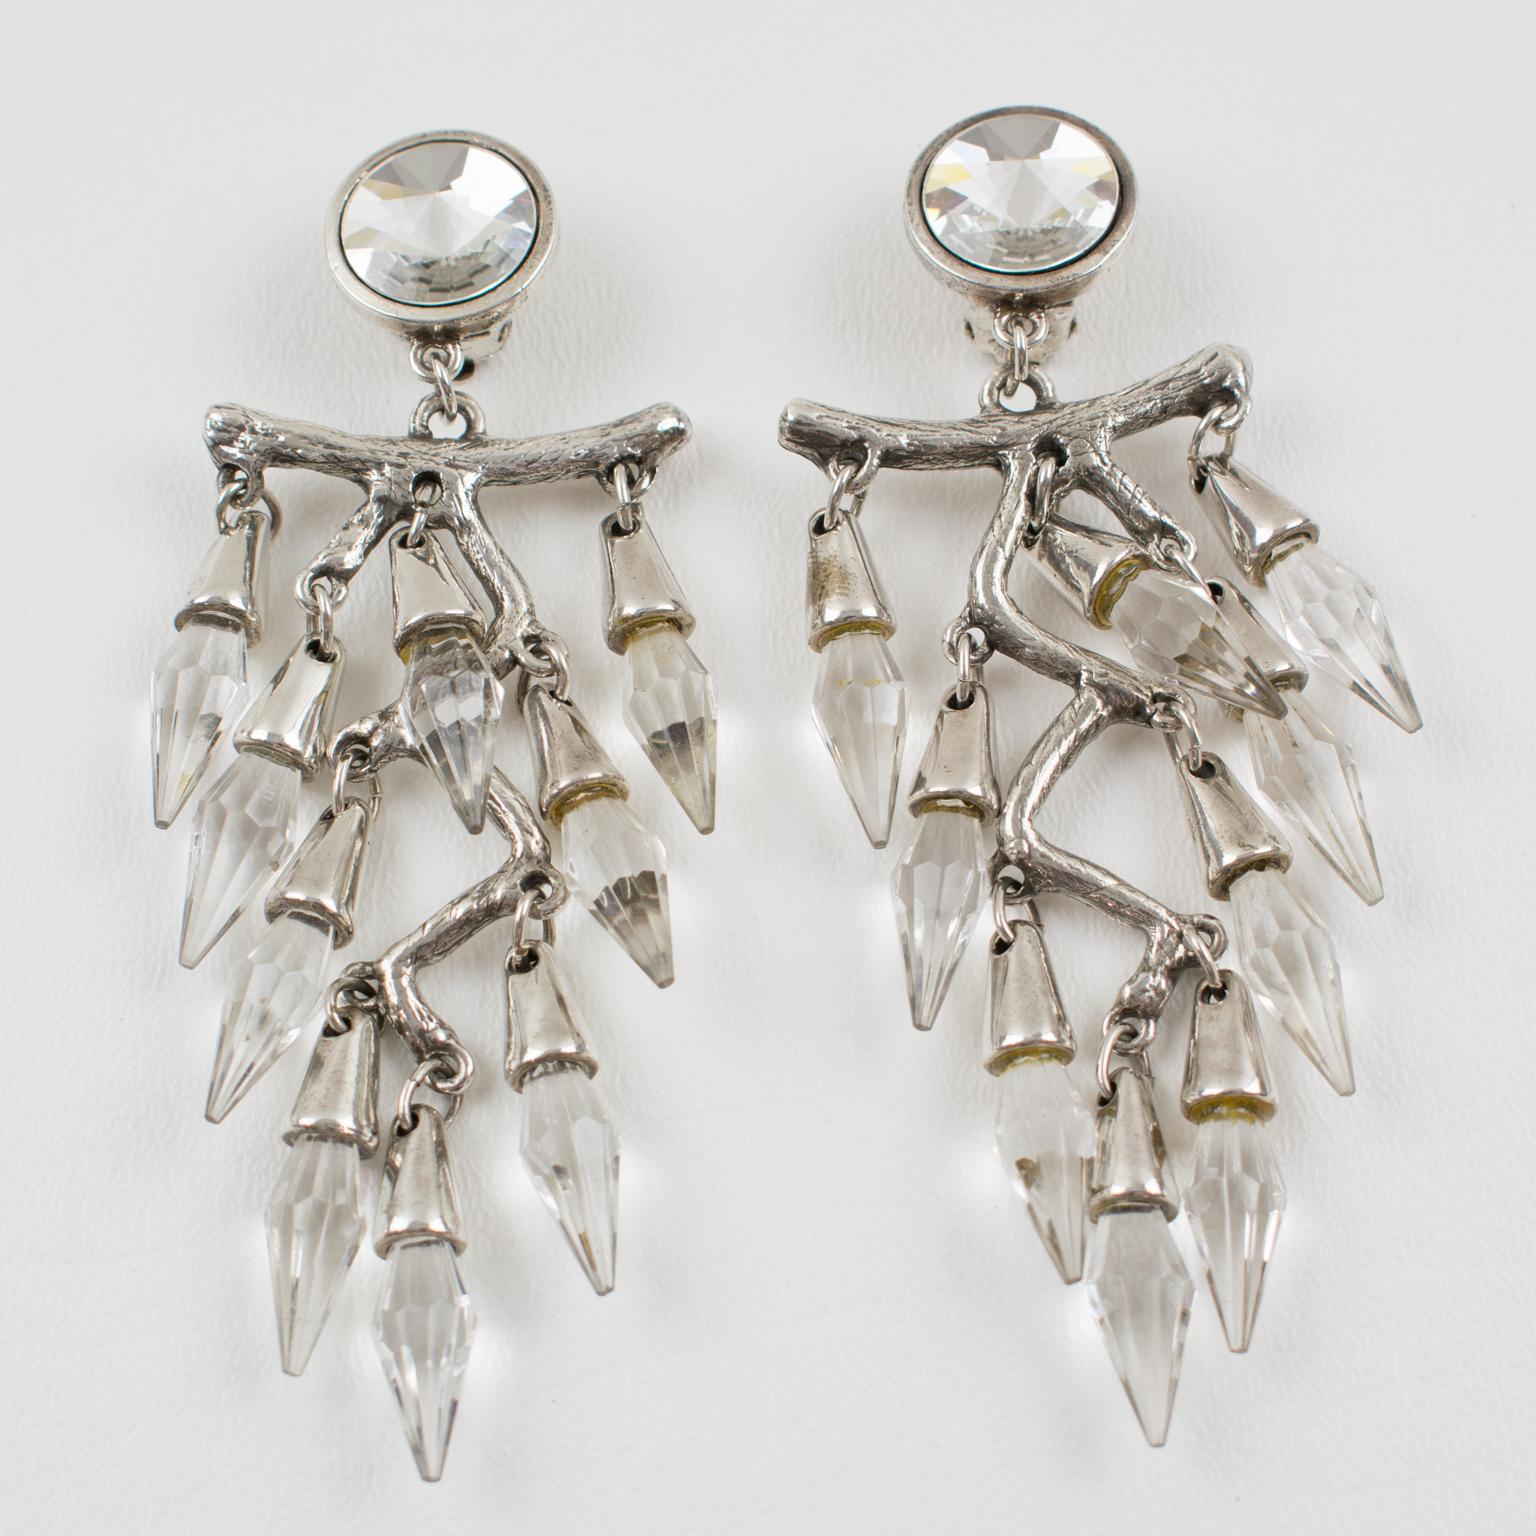 Modernist Massive Chandelier Silver Plate Clip Earrings with Dangle Crystal Drops For Sale